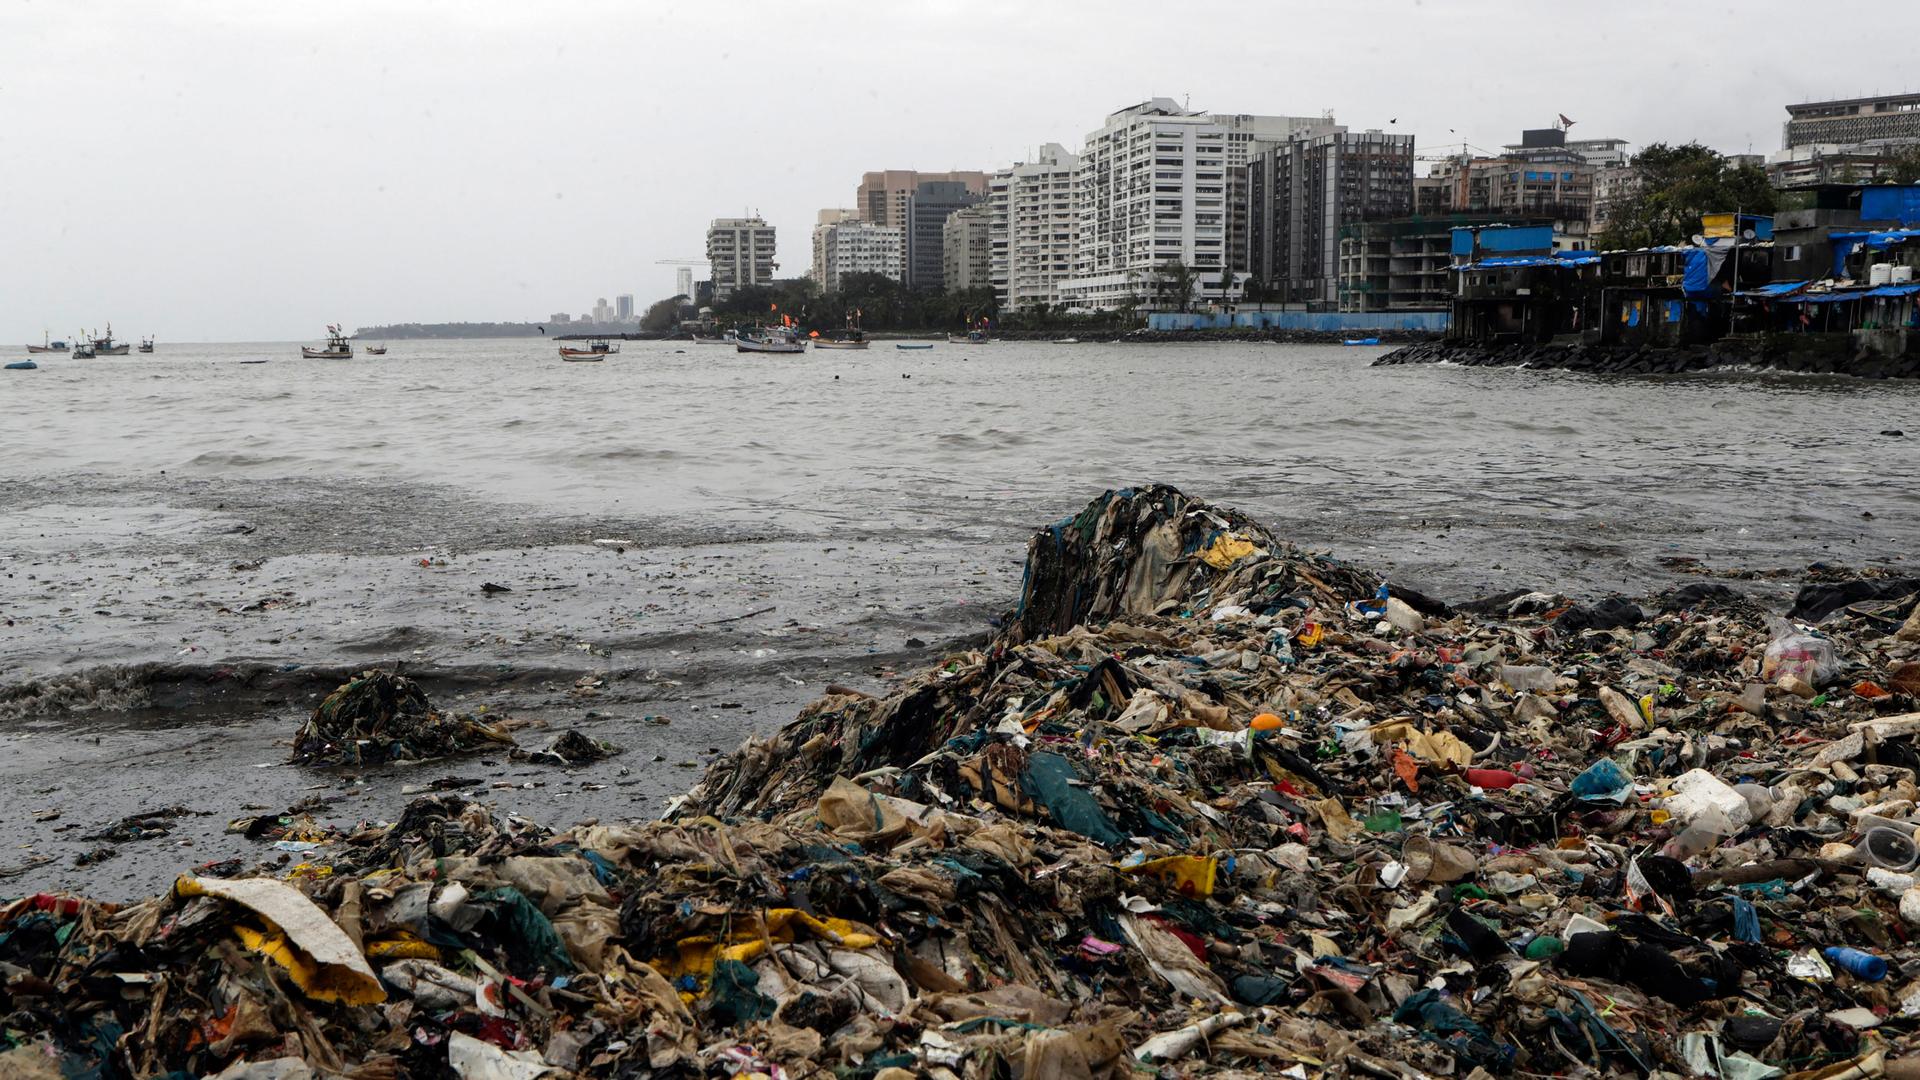 A large pile of garbage is shown along the shores of Mumbai, India, with several tall buildings in the distance.